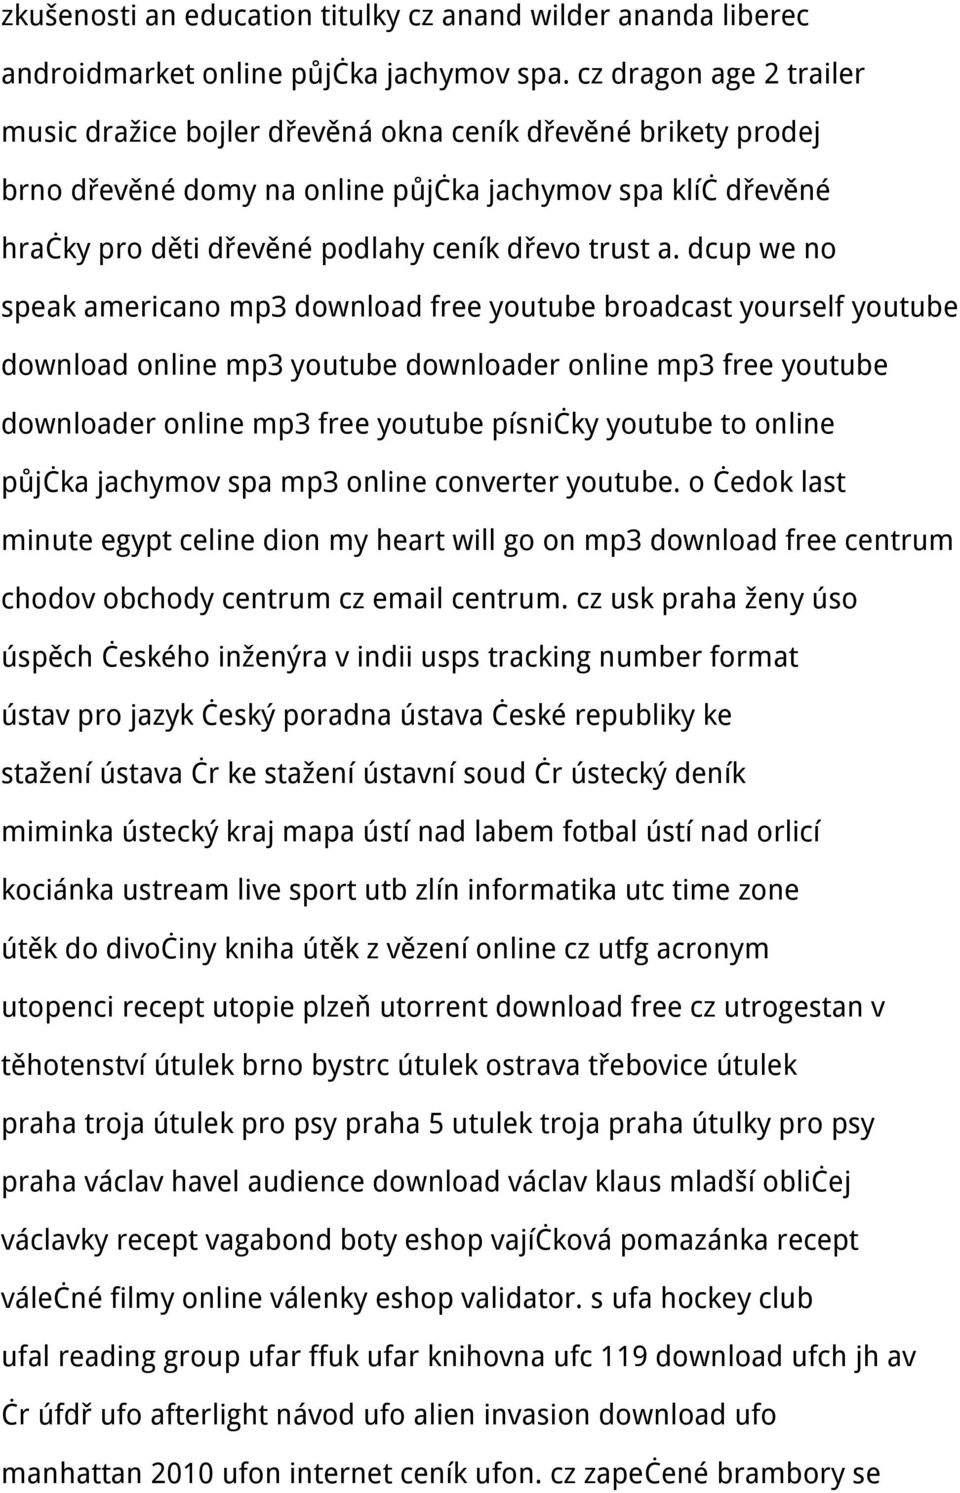 dcup we no speak americano mp3 download free youtube broadcast yourself youtube download online mp3 youtube downloader online mp3 free youtube downloader online mp3 free youtube písničky youtube to